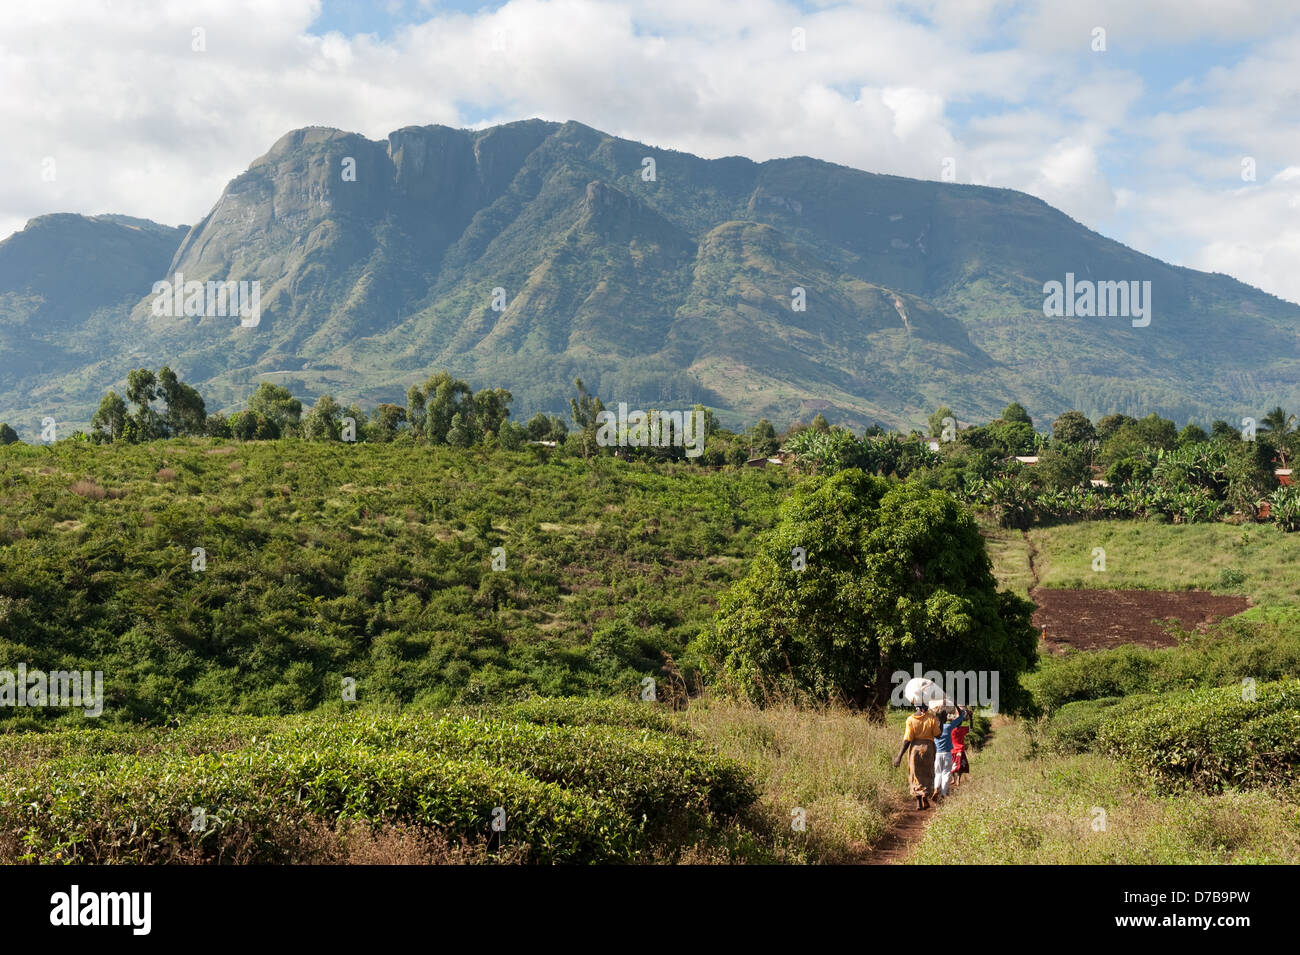 People crossing the tea plantations at Gurue, Mozambique Stock Photo